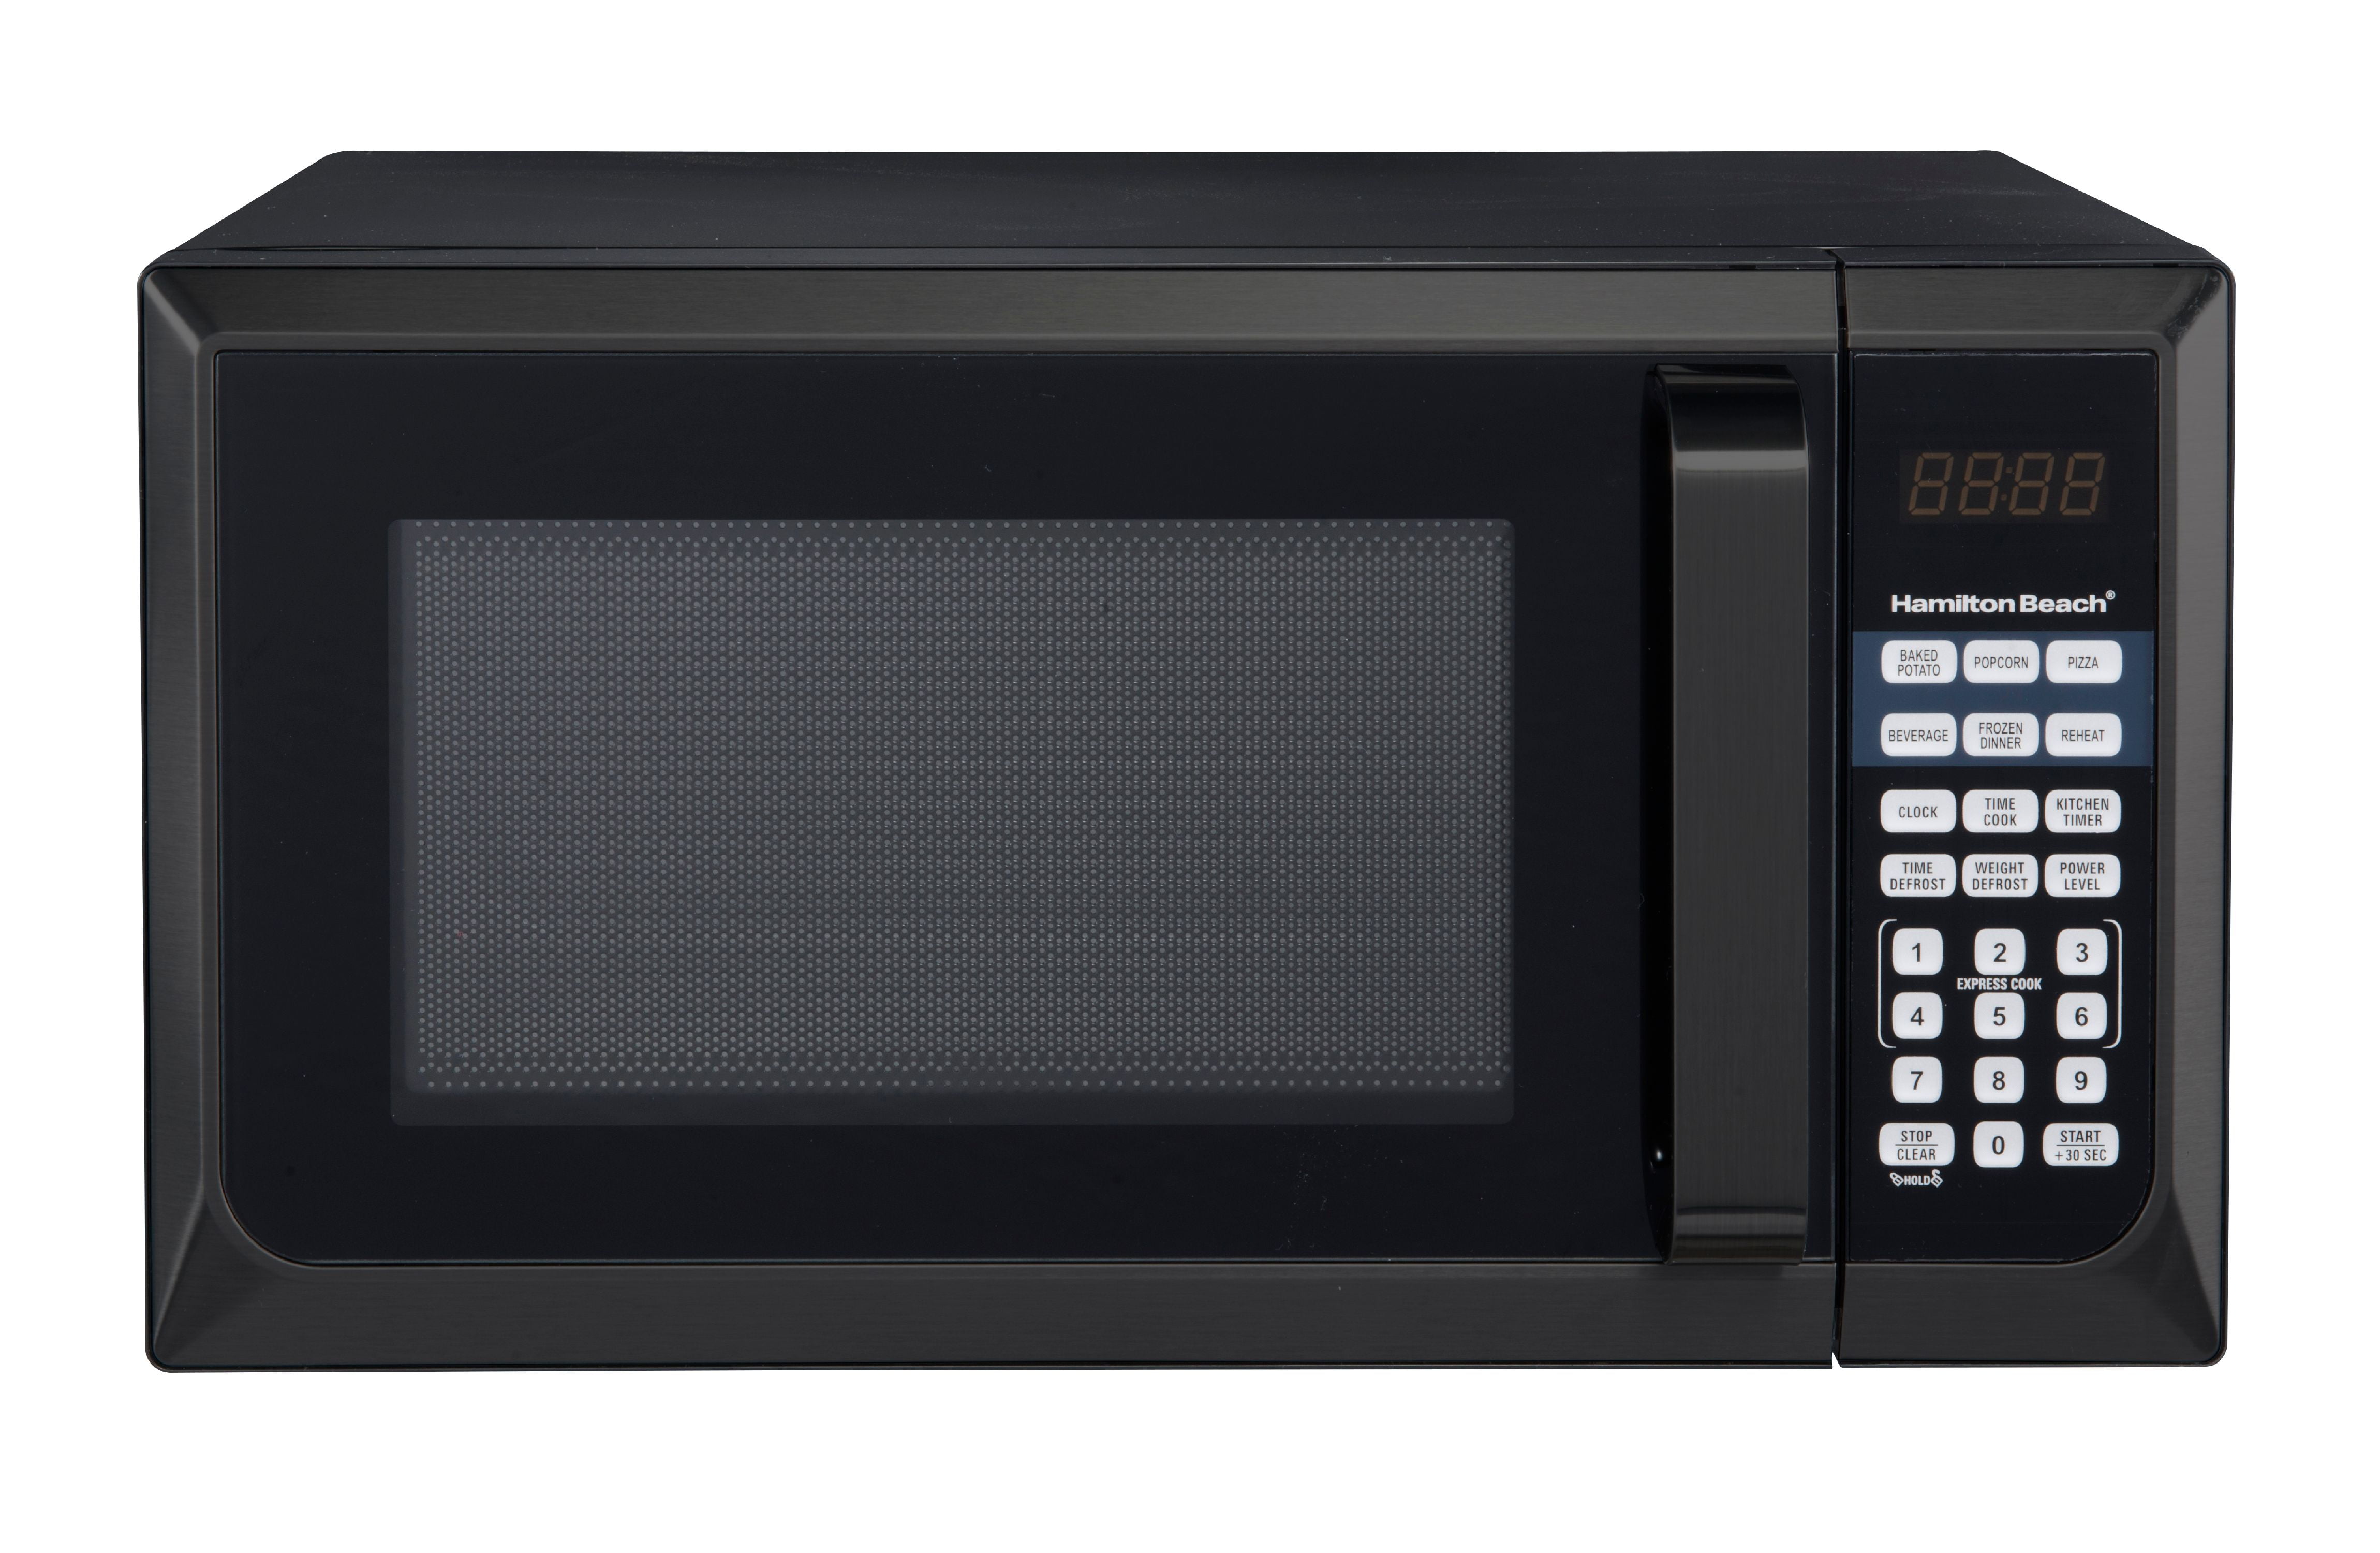 Hamilton Beach 0.7 Cu For Small Kitchen Space Black Microwave Oven Ft 